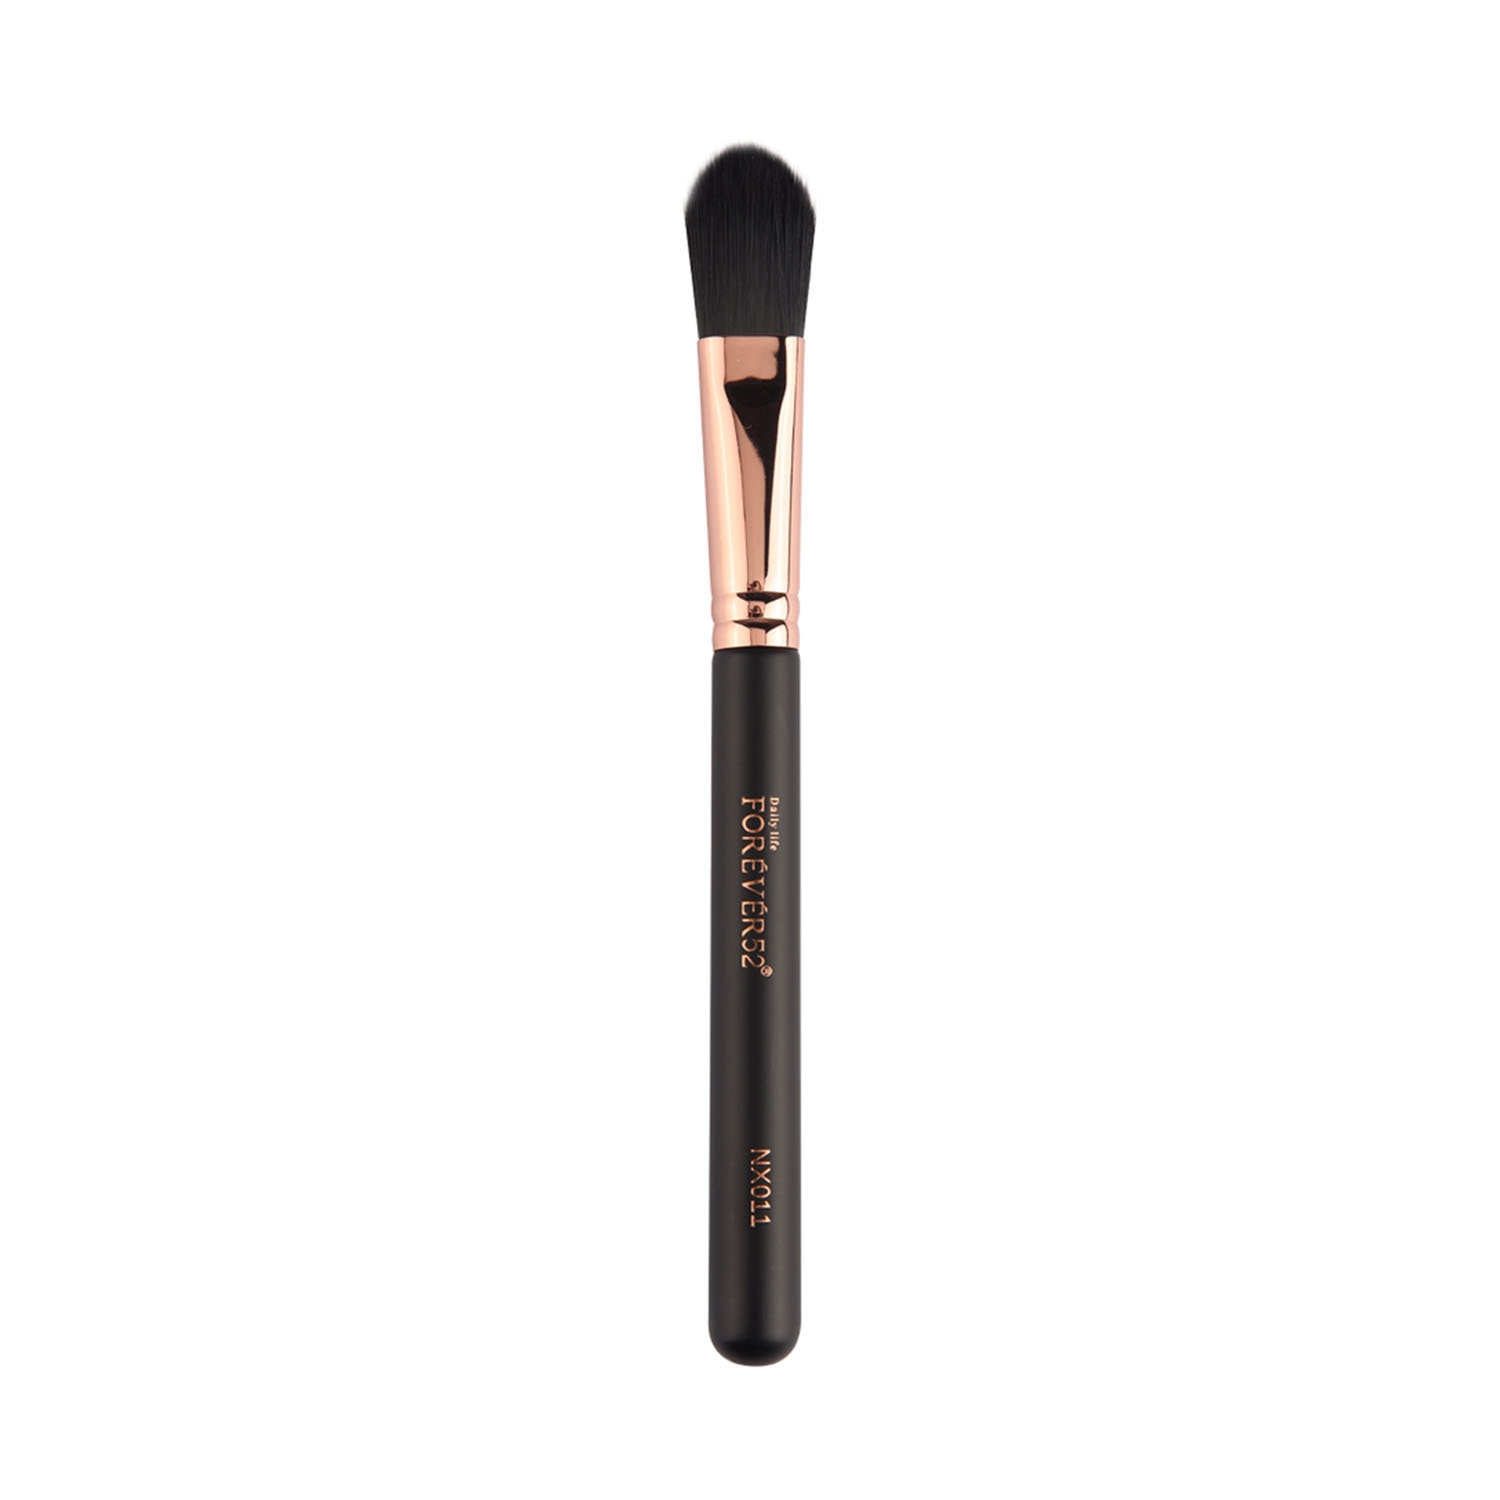 Daily Life Forever52 | Daily Life Forever52 Foundation Brush - NX011 (1Pc)